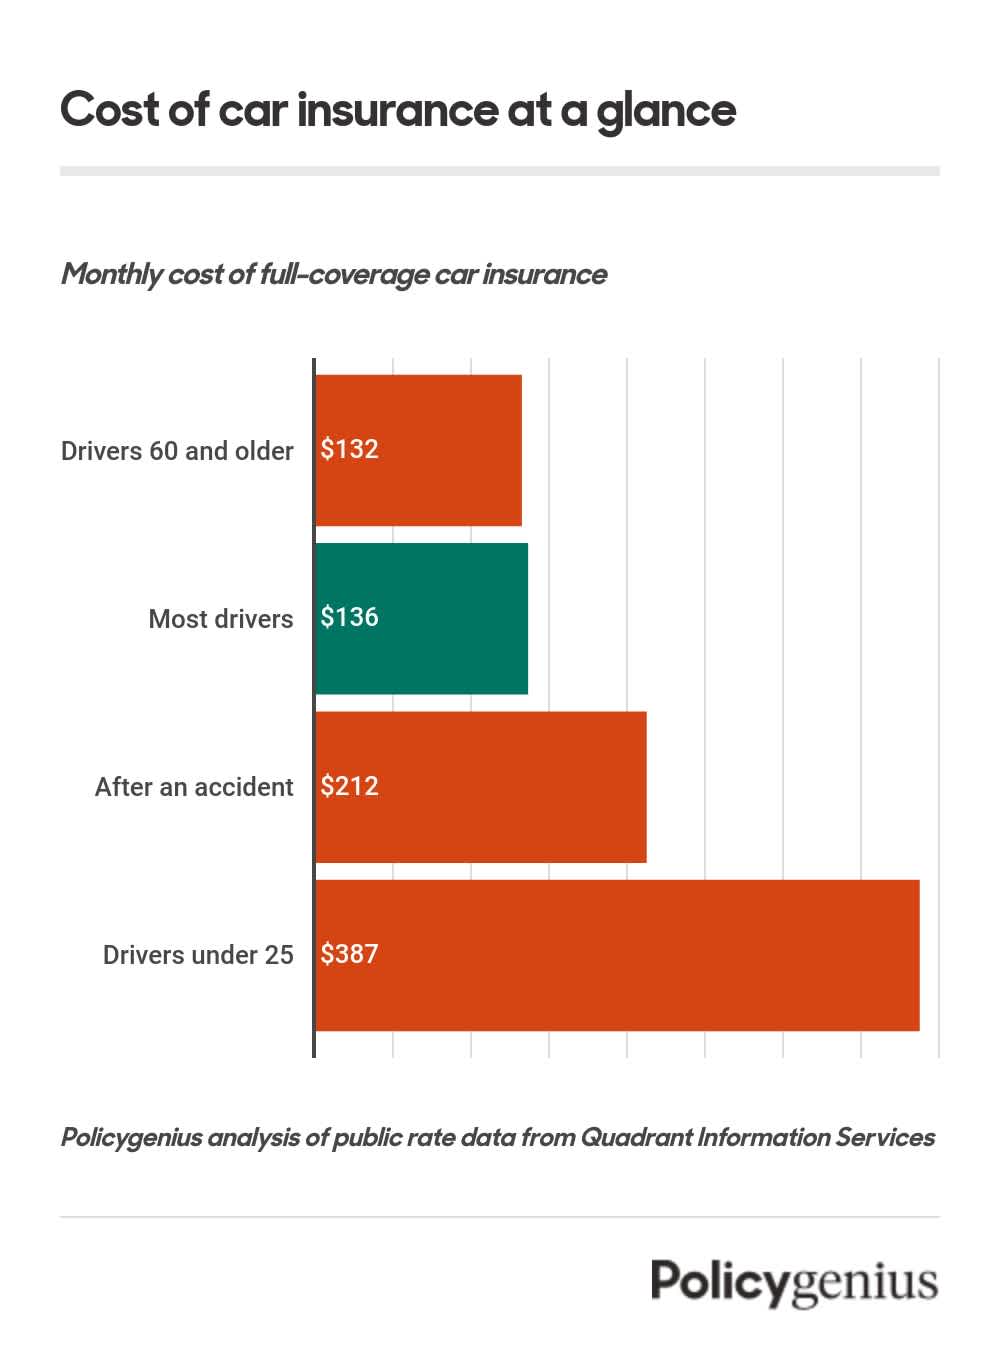 A bar graph showing the average cost of car insurance for most drivers compared with seniors, drivers who have been in a past accident, and drivers under 25 years old.